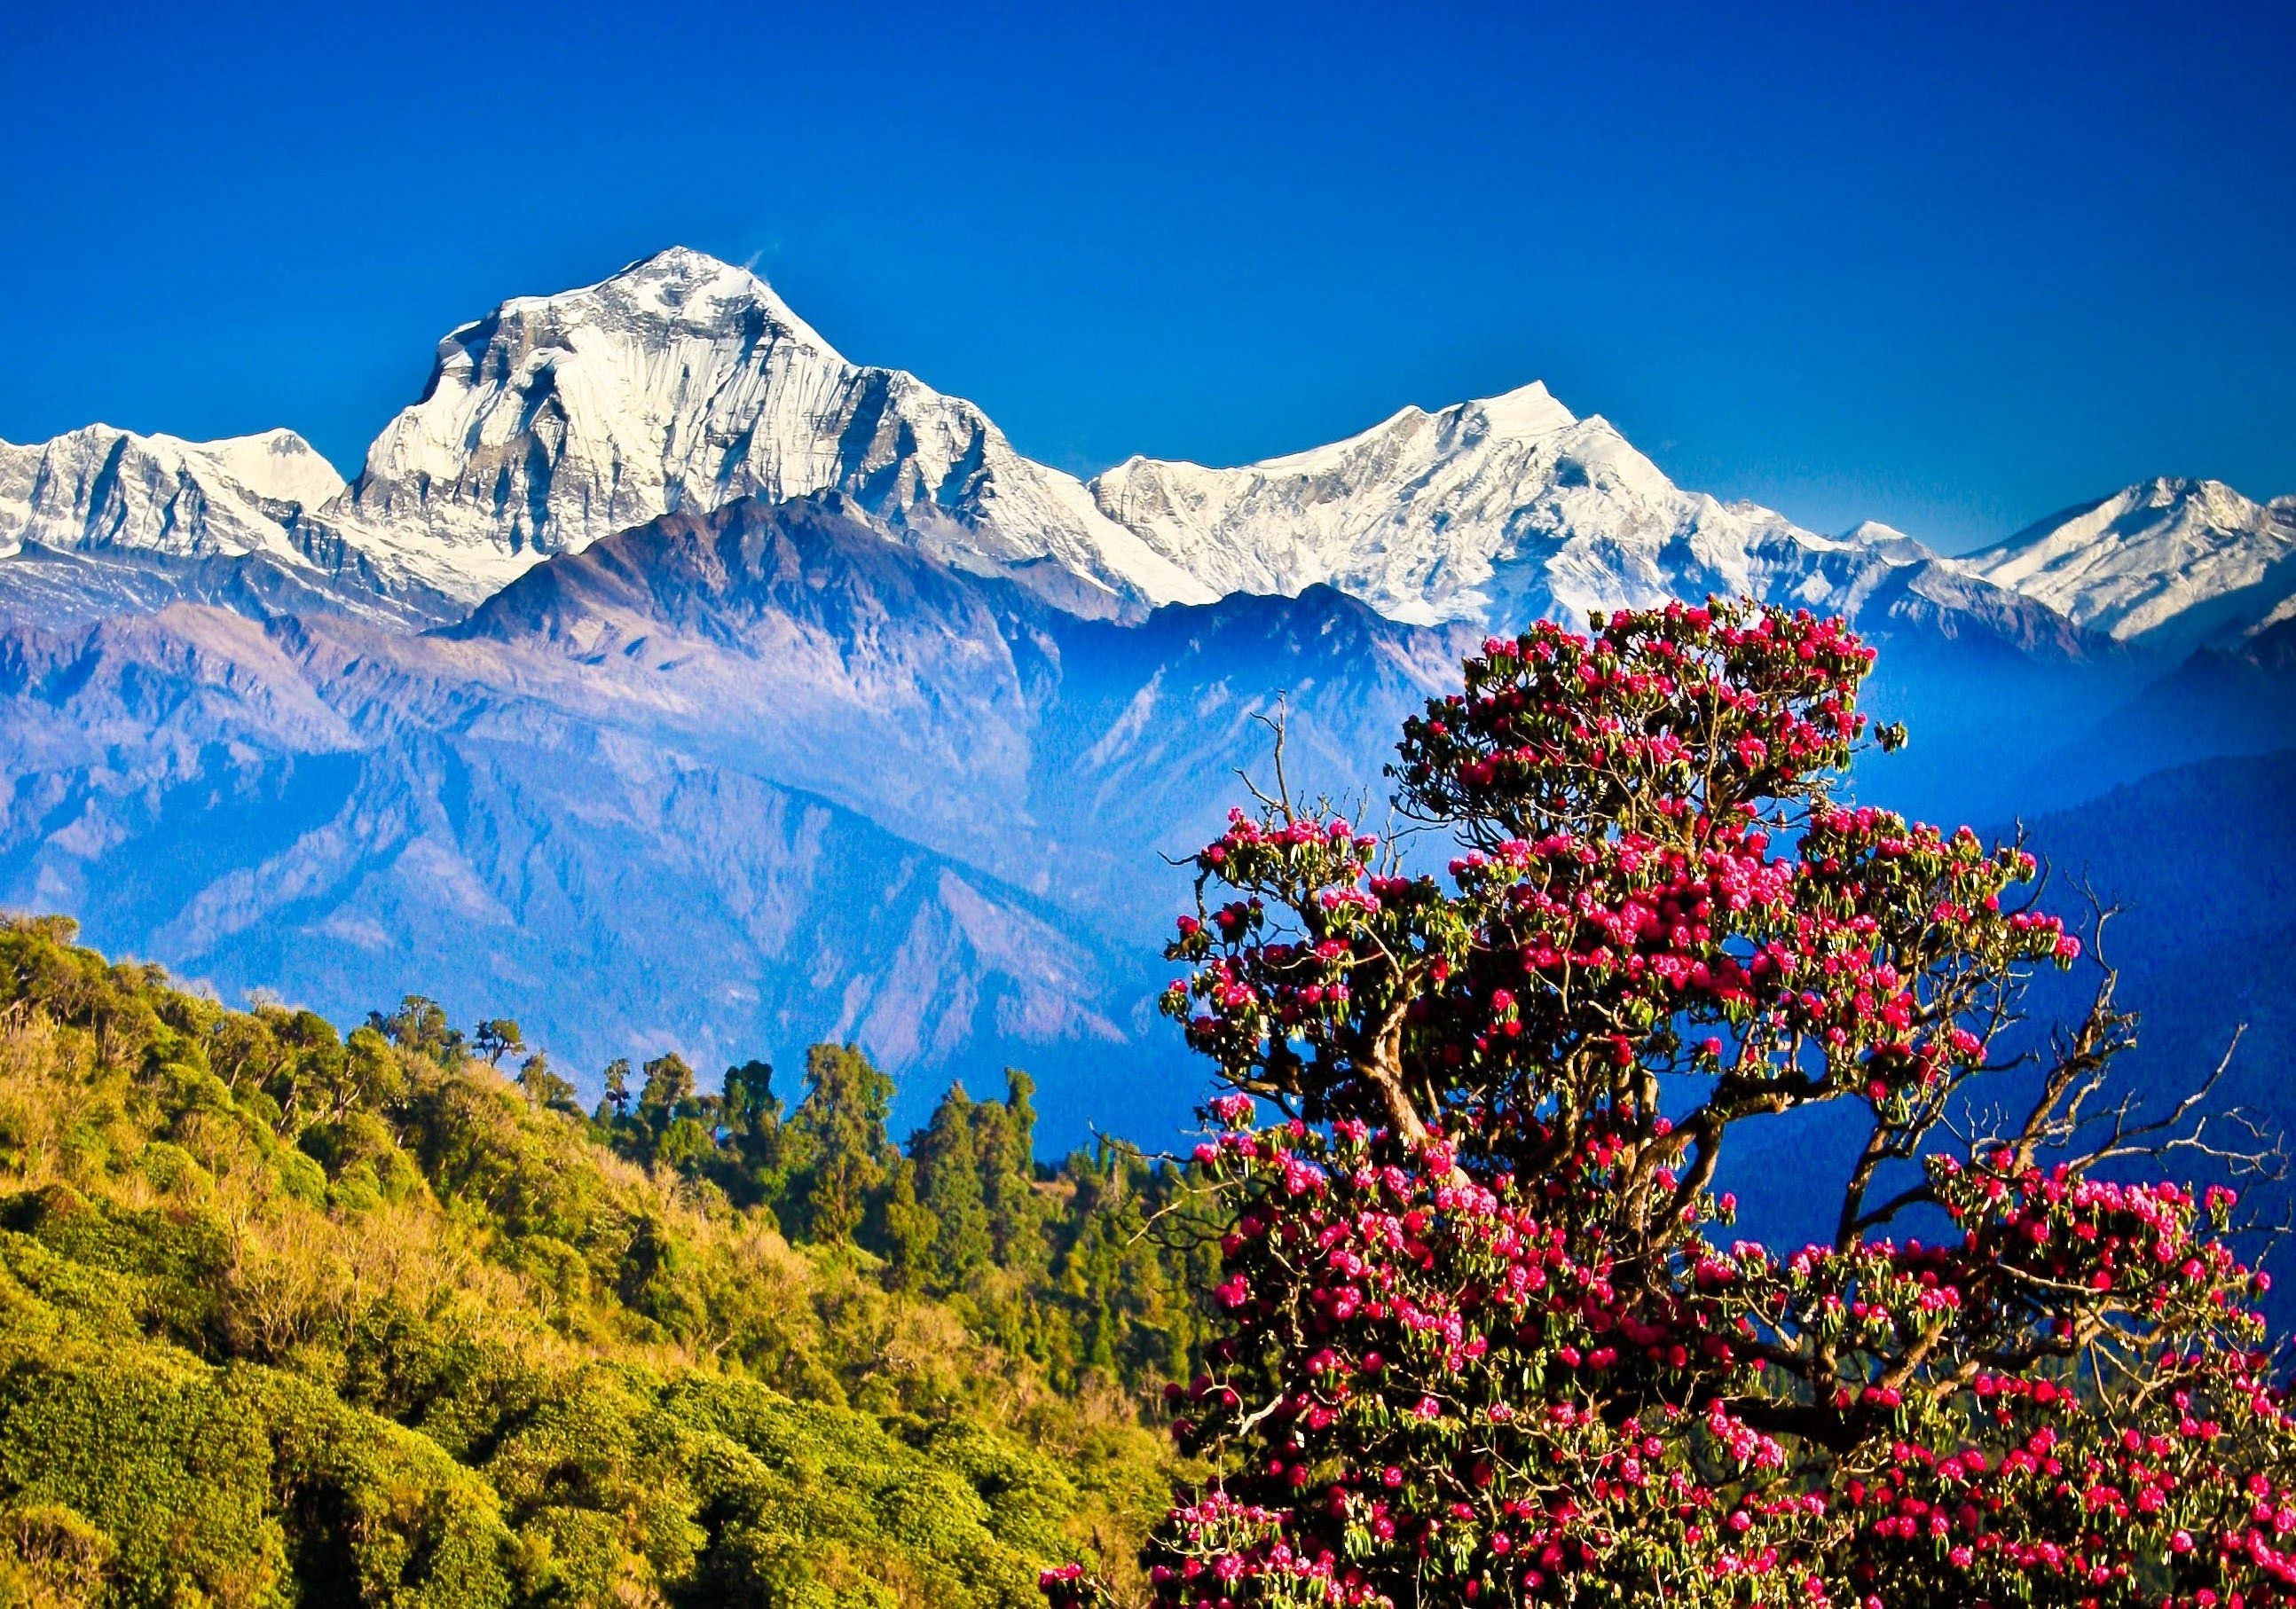 Nepal Himalayas Mountains Nature Landscape Clear Sky Hills Trees 2588x1814